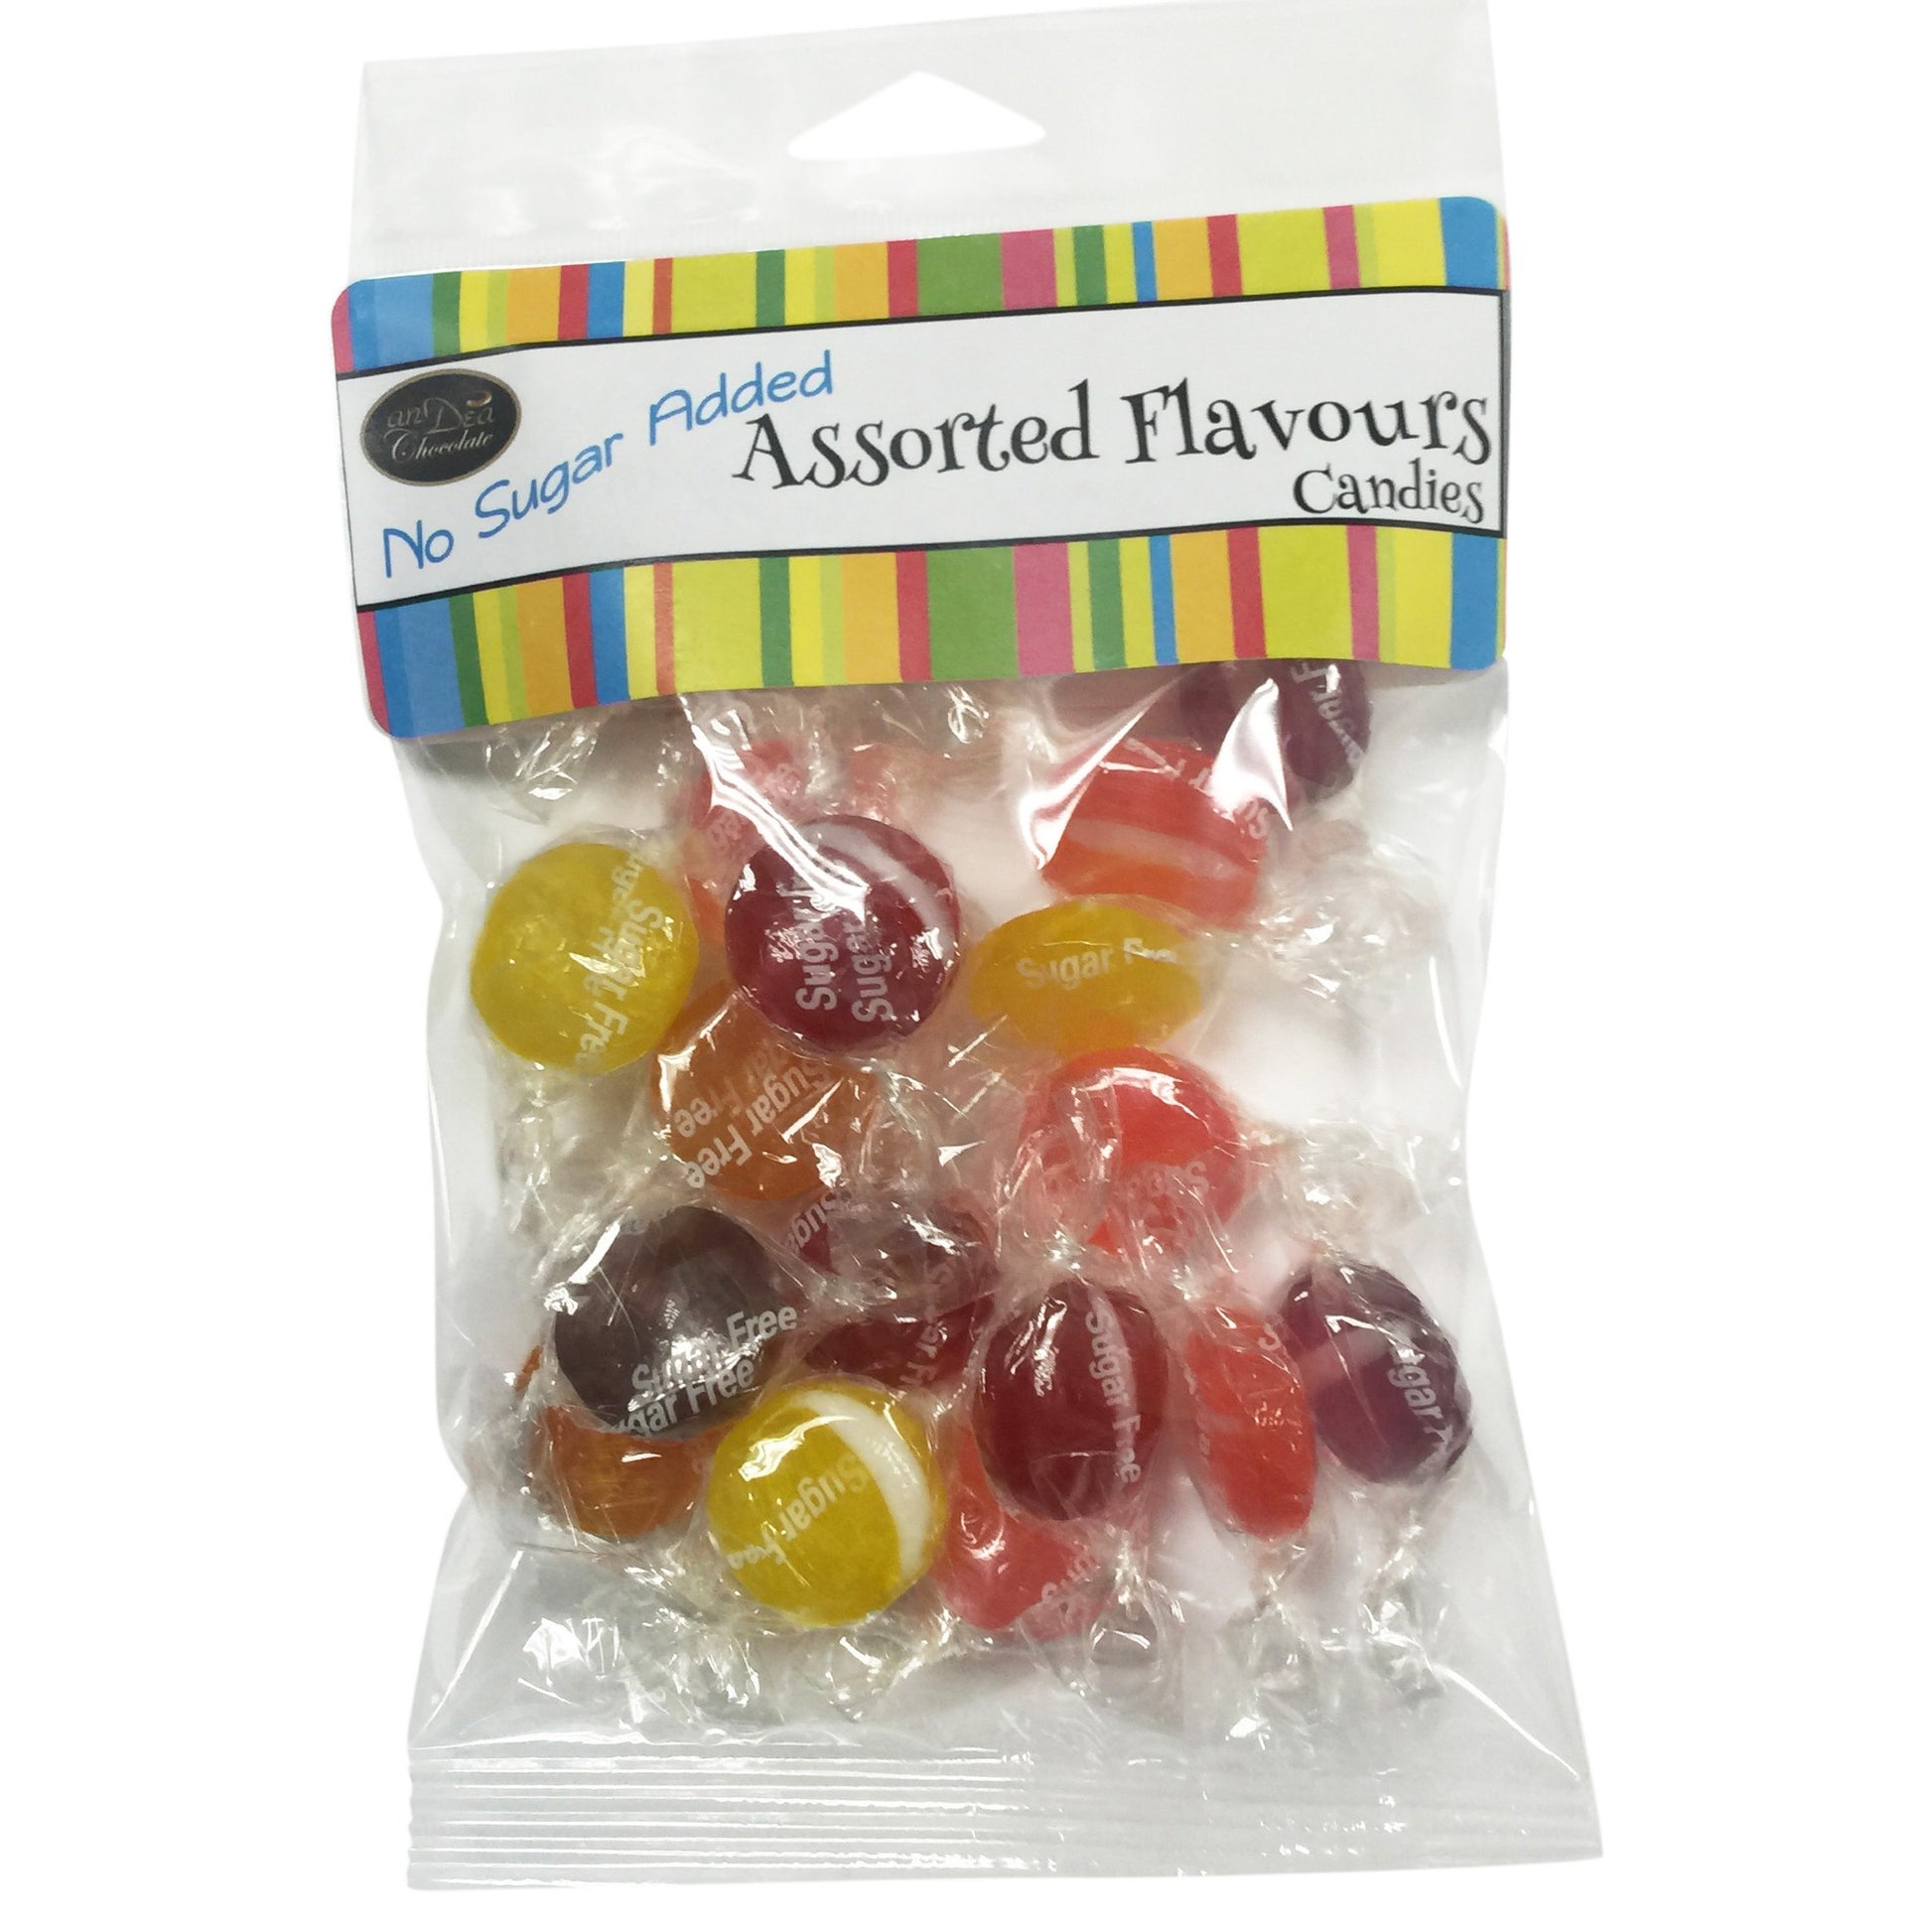 Scrumptious sugar free Assorted Flavours hard candies. Superior quality and domestically produced, this candy provides an exquisite array of flavours  to delight and excite the most demanding palate. Cello package.